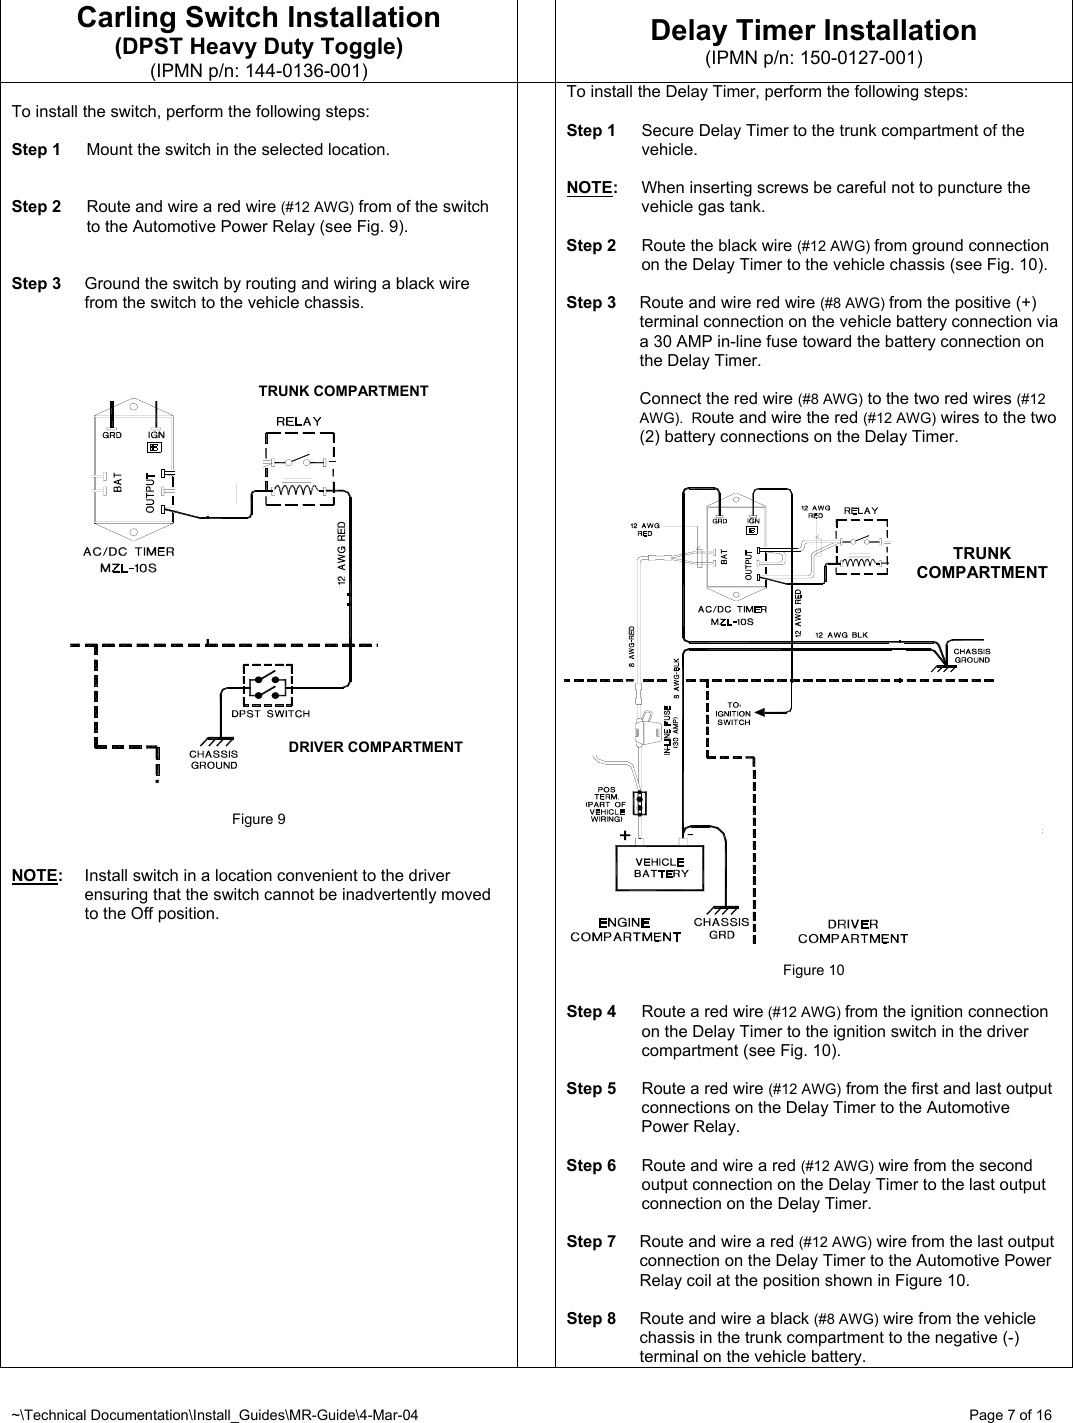 ~\Technical Documentation\Install_Guides\MR-Guide\4-Mar-04   Page 7 of 16 TRUNK COMPARTMENT TRUNK COMPARTMENT DRIVER COMPARTMENT Carling Switch Installation (DPST Heavy Duty Toggle) (IPMN p/n: 144-0136-001)  Delay Timer Installation (IPMN p/n: 150-0127-001)  To install the switch, perform the following steps:  Step 1  Mount the switch in the selected location.   Step 2  Route and wire a red wire (#12 AWG) from of the switch to the Automotive Power Relay (see Fig. 9).   Step 3  Ground the switch by routing and wiring a black wire from the switch to the vehicle chassis.                            Figure 9   NOTE:  Install switch in a location convenient to the driver ensuring that the switch cannot be inadvertently moved to the Off position.  To install the Delay Timer, perform the following steps:  Step 1  Secure Delay Timer to the trunk compartment of the vehicle.  NOTE:  When inserting screws be careful not to puncture the vehicle gas tank.  Step 2  Route the black wire (#12 AWG) from ground connection on the Delay Timer to the vehicle chassis (see Fig. 10).  Step 3  Route and wire red wire (#8 AWG) from the positive (+) terminal connection on the vehicle battery connection via a 30 AMP in-line fuse toward the battery connection on the Delay Timer.    Connect the red wire (#8 AWG) to the two red wires (#12 AWG).  Route and wire the red (#12 AWG) wires to the two (2) battery connections on the Delay Timer.                       Figure 10  Step 4  Route a red wire (#12 AWG) from the ignition connection on the Delay Timer to the ignition switch in the driver compartment (see Fig. 10).  Step 5  Route a red wire (#12 AWG) from the first and last output connections on the Delay Timer to the Automotive Power Relay.  Step 6  Route and wire a red (#12 AWG) wire from the second output connection on the Delay Timer to the last output connection on the Delay Timer.   Step 7  Route and wire a red (#12 AWG) wire from the last output connection on the Delay Timer to the Automotive Power Relay coil at the position shown in Figure 10.  Step 8  Route and wire a black (#8 AWG) wire from the vehicle chassis in the trunk compartment to the negative (-) terminal on the vehicle battery. 